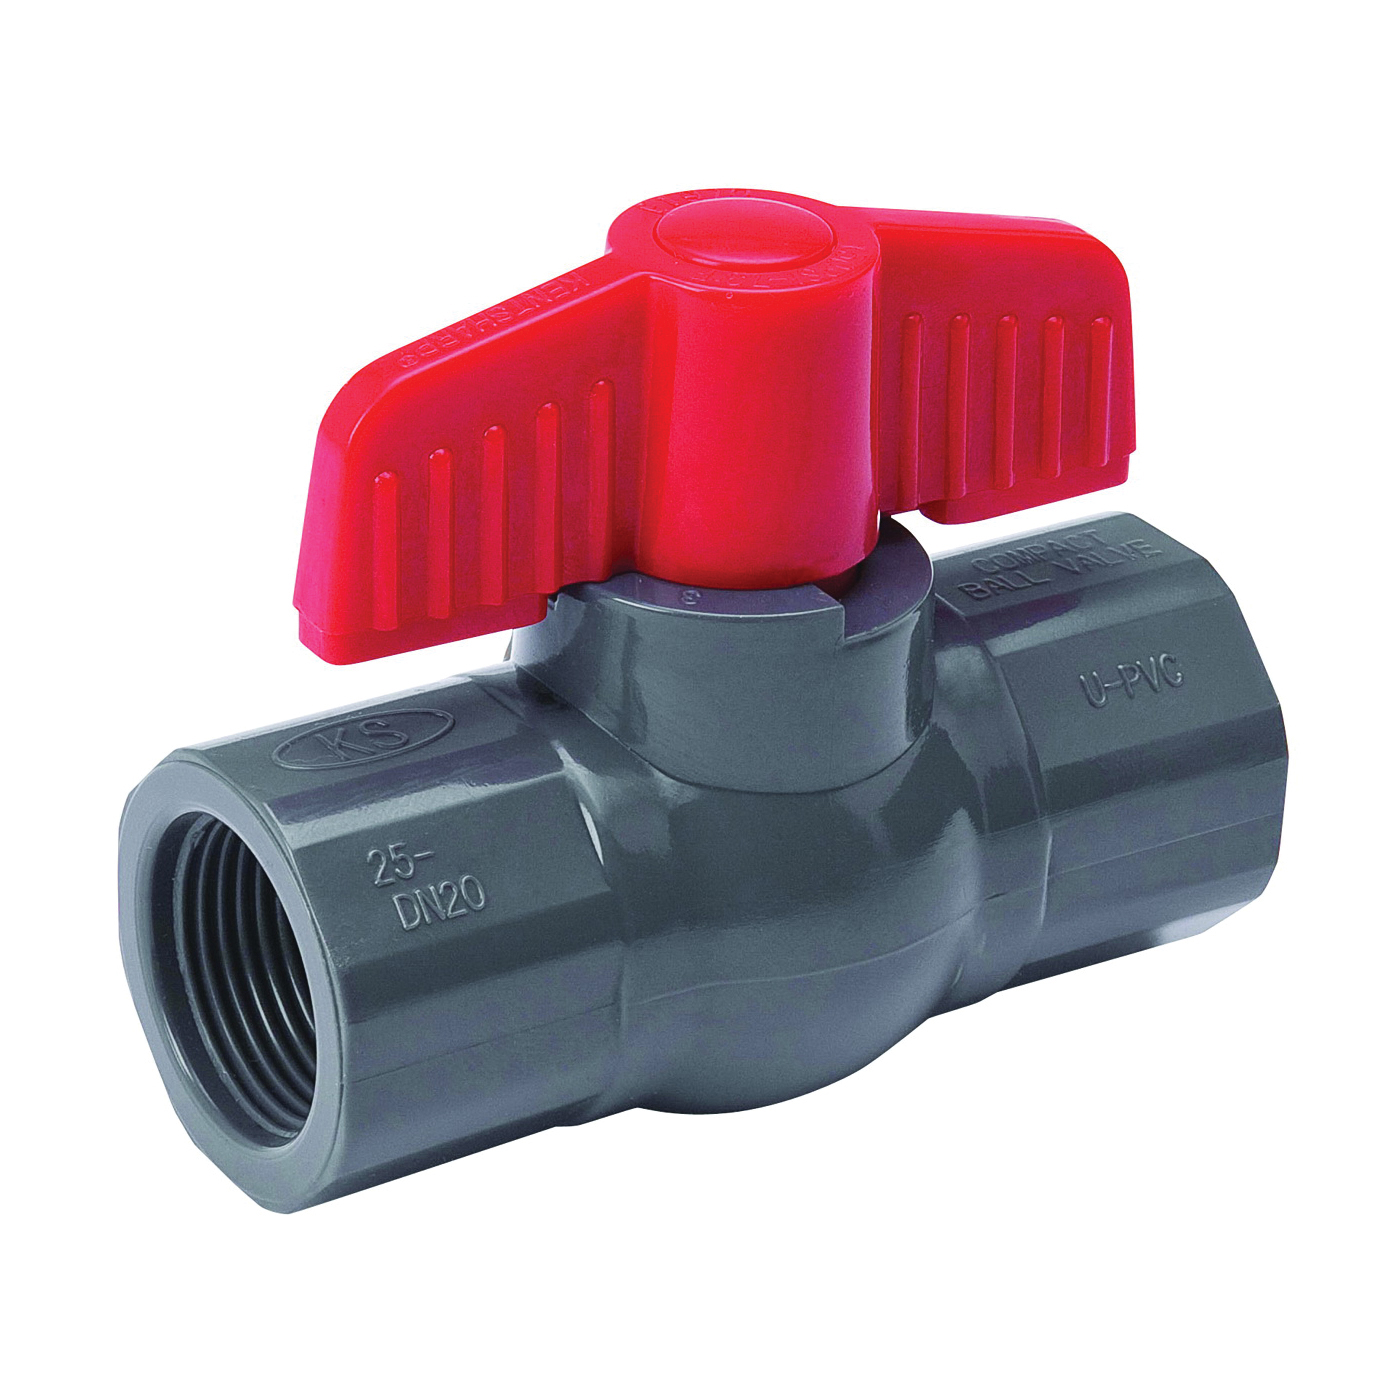 107-105 Ball Valve, 1 in Connection, FPT x FPT, 150 psi Pressure, PVC Body